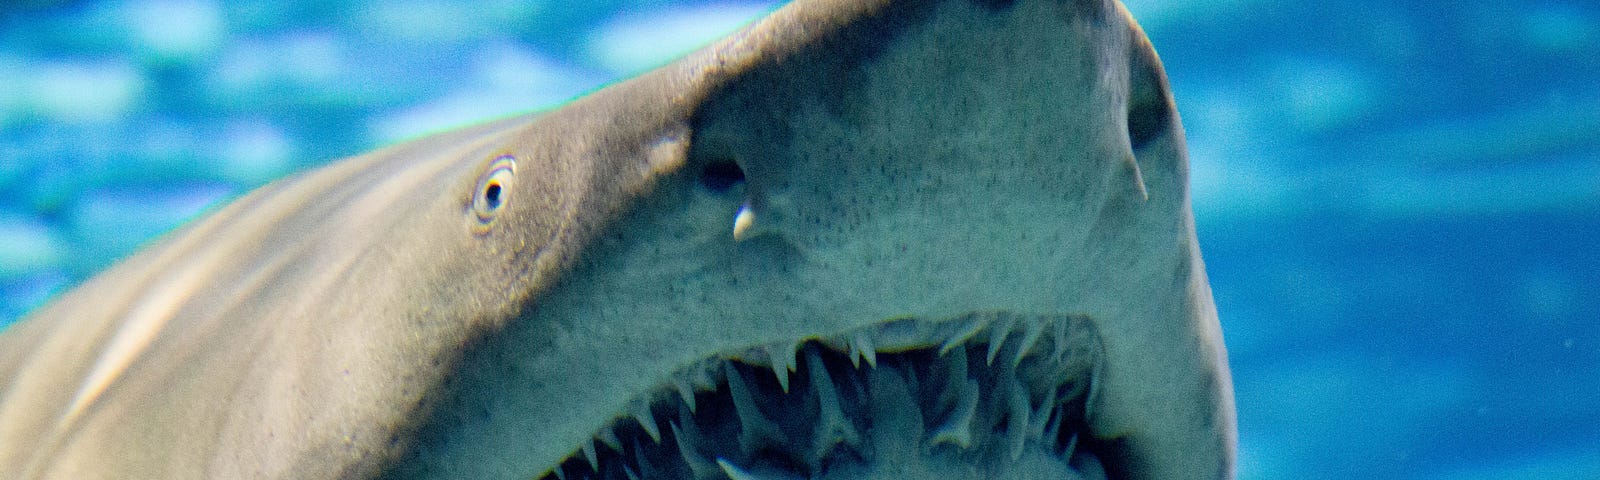 Picture of a shark’s mouth as this story is about my son’s extra teeth.